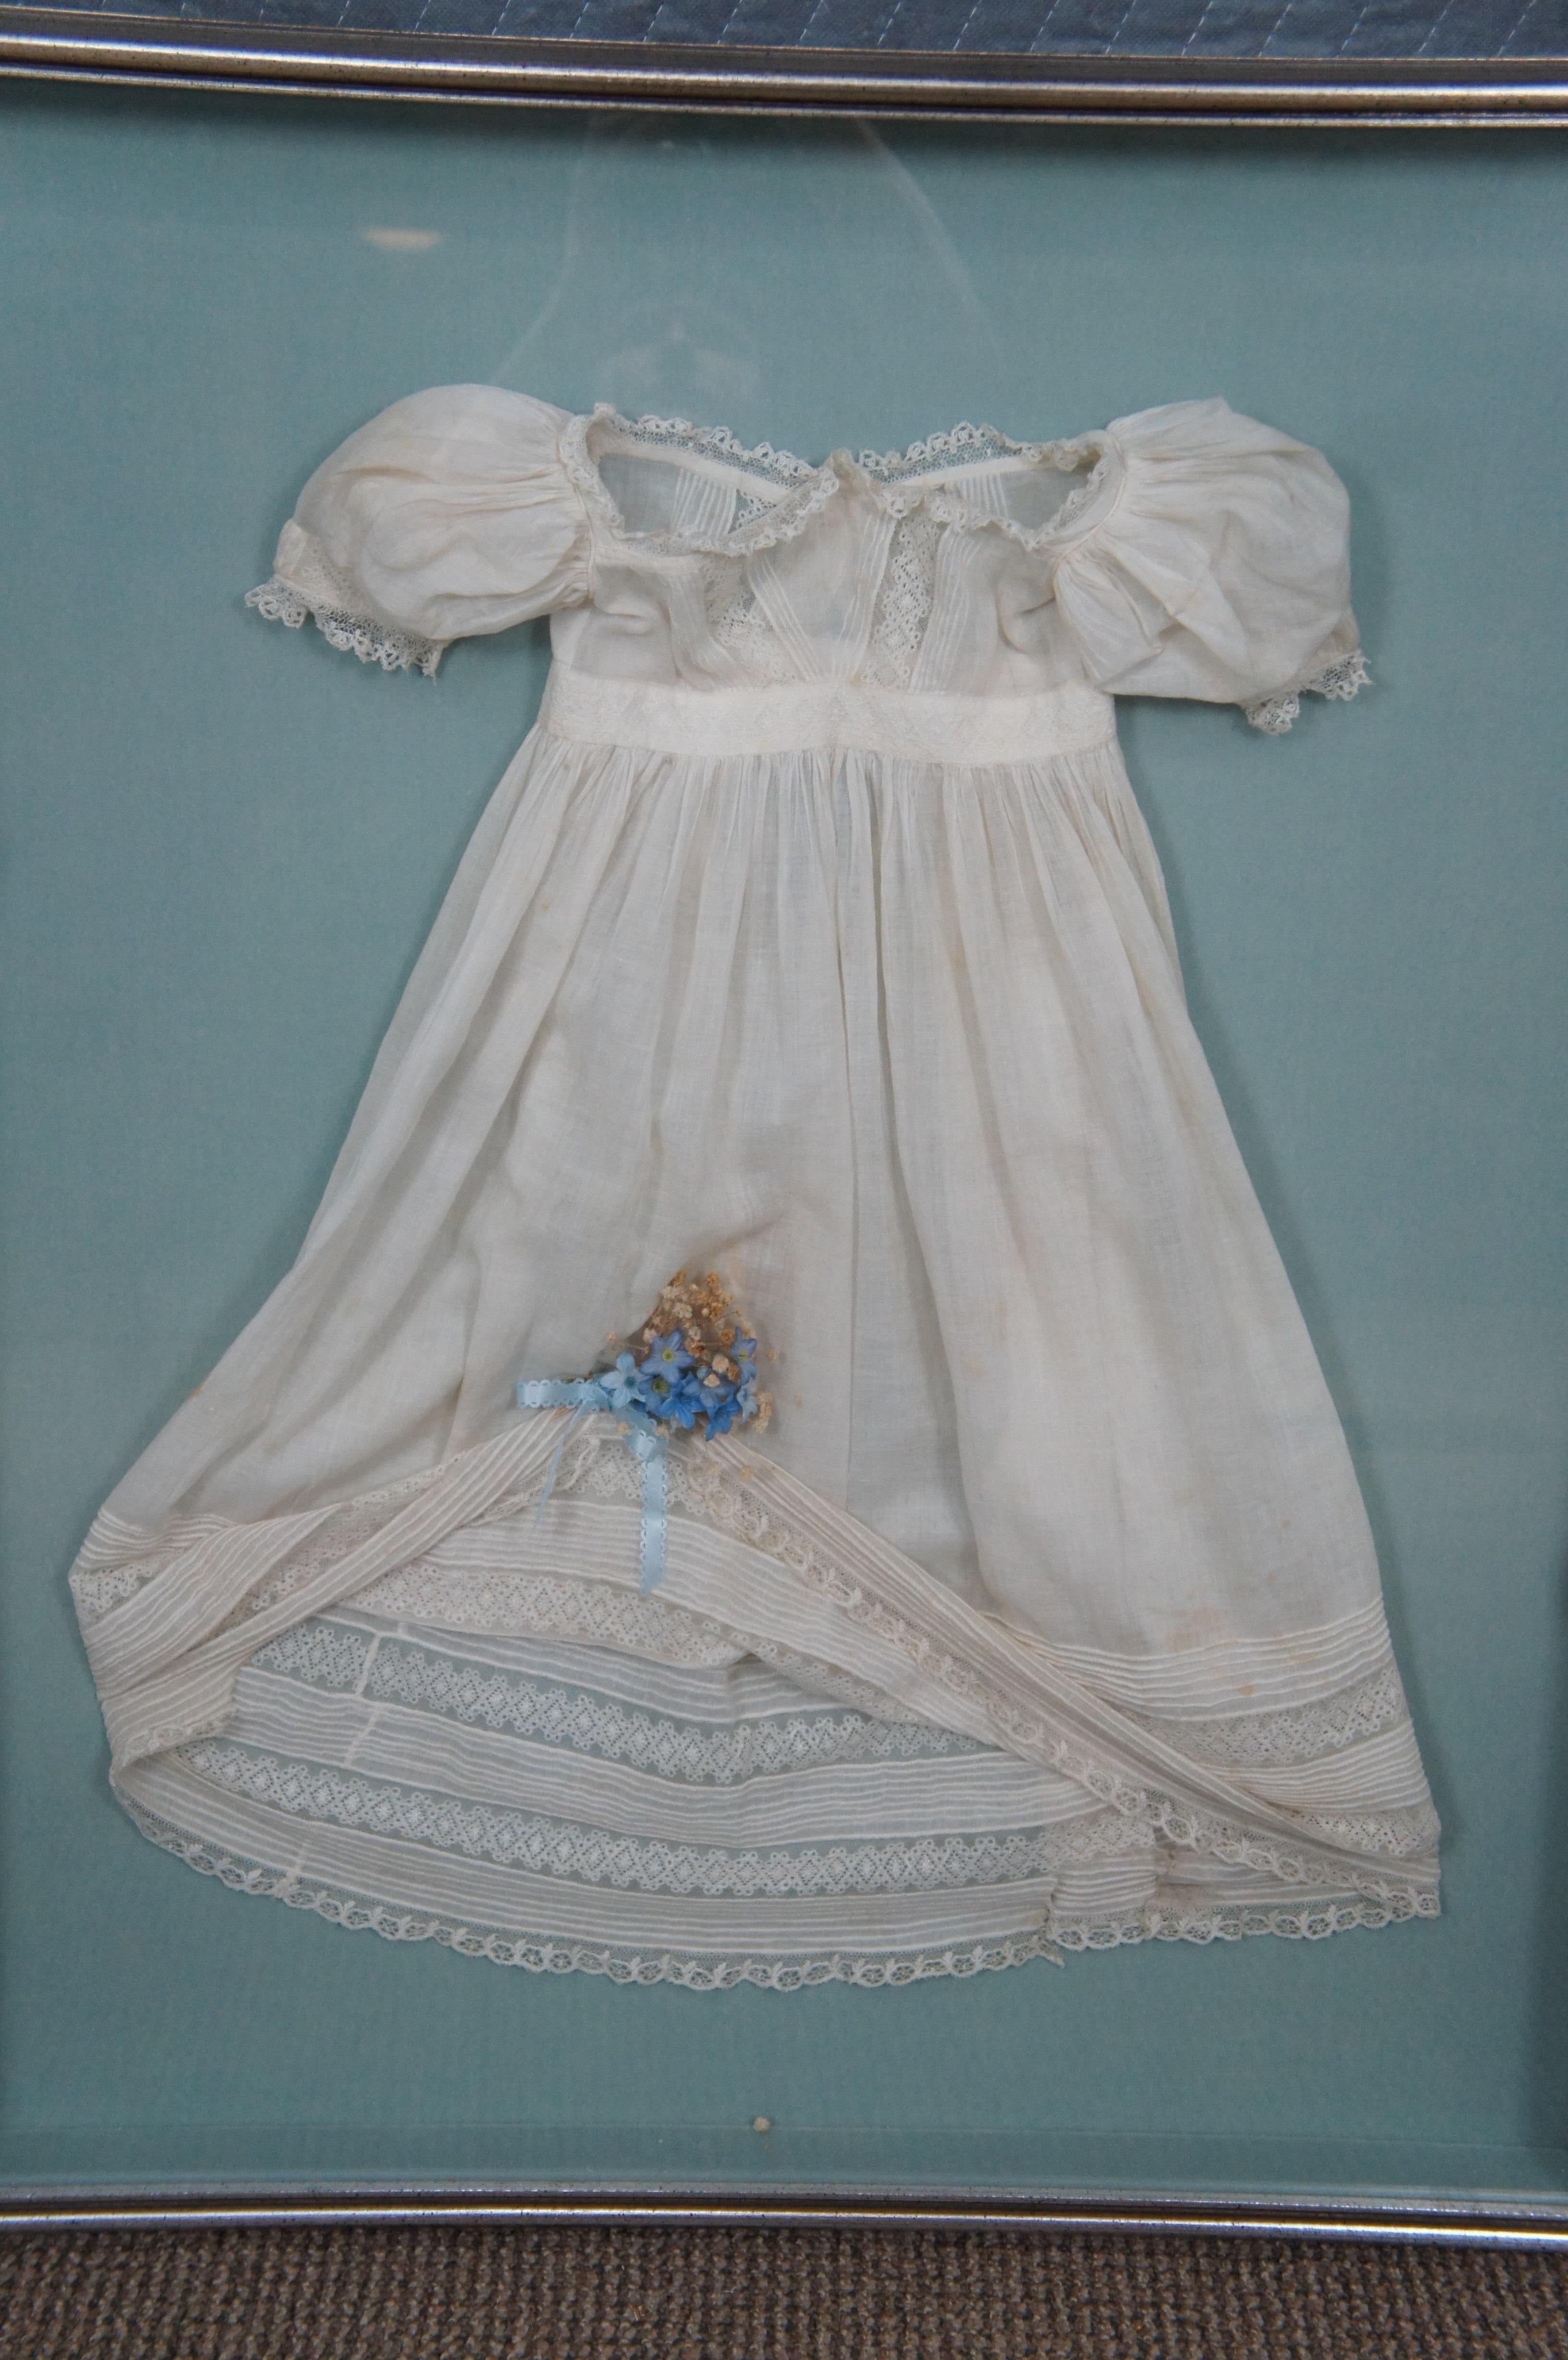 Cotton Antique 19th Century Infant Christening Gown Lace Baby Dress Shadowbox For Sale